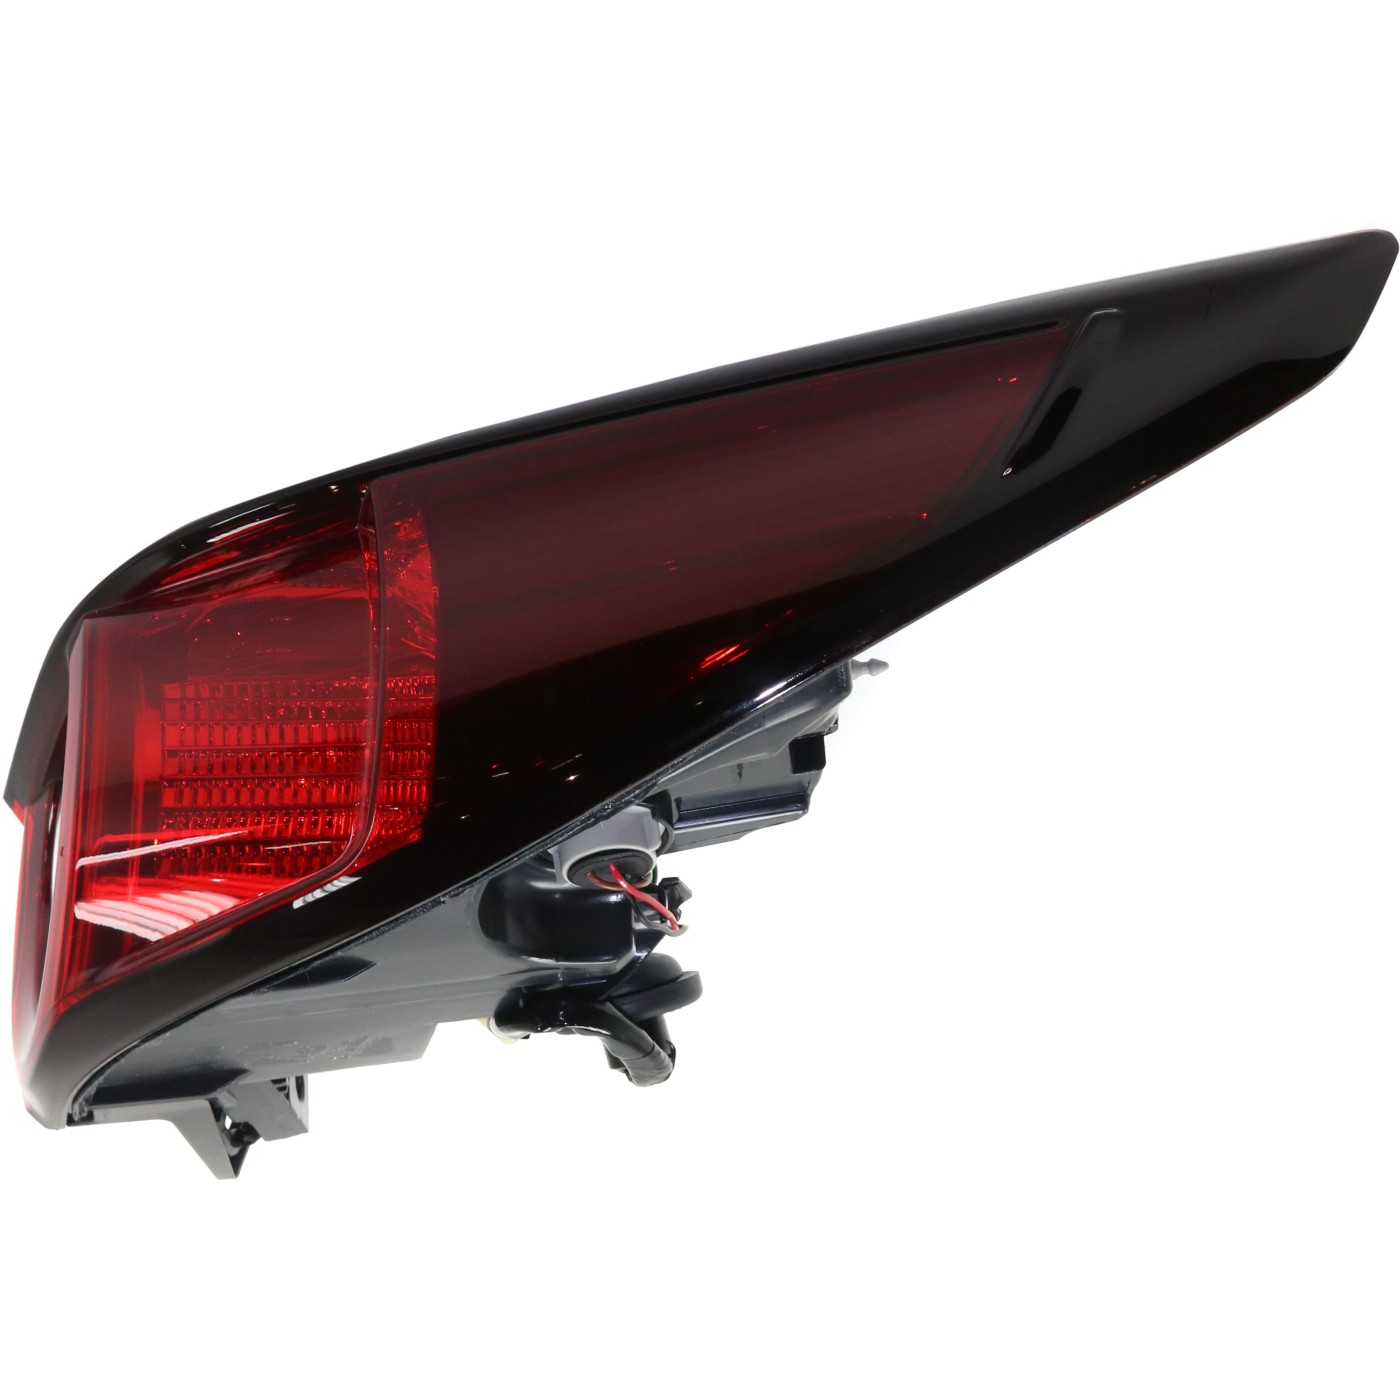 Tail Light Assembly For 2017-2018 Mazda CX-5 Passenger Side Outer Halogen | eBay 2018 Mazda Cx 5 Tail Light Replacement